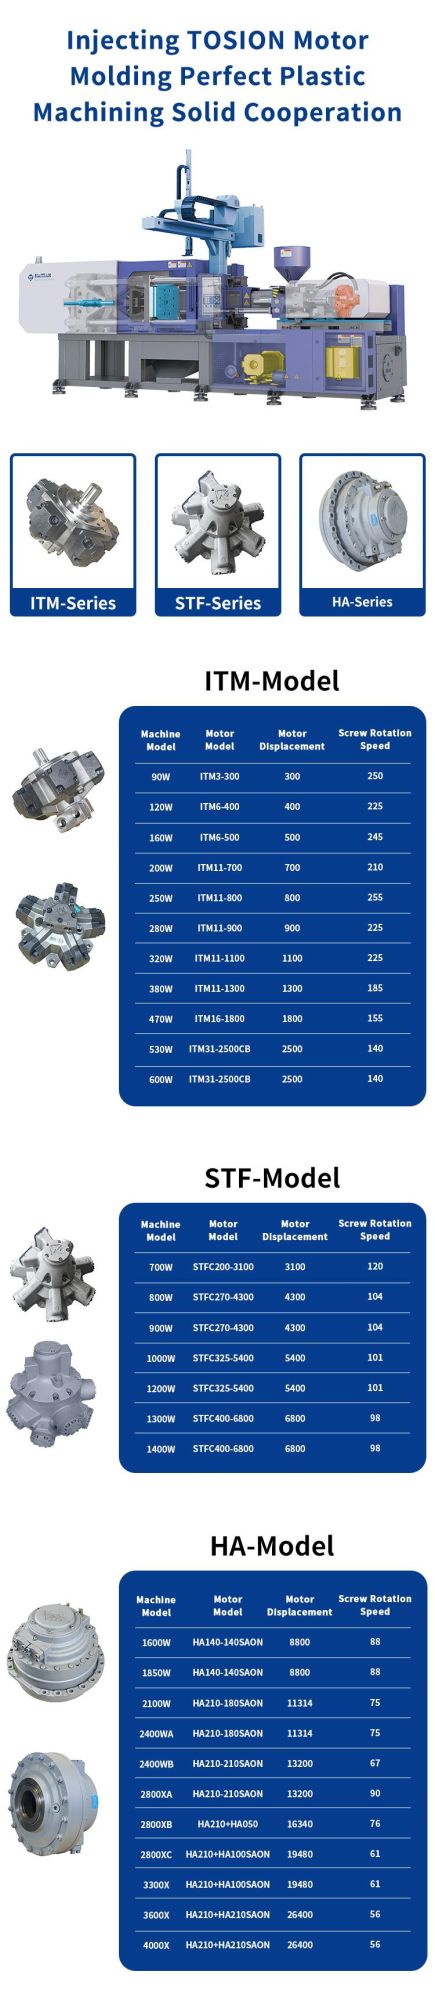 Tosion Radial Hydraulic Piston Motor Used for Injection Molding Machine